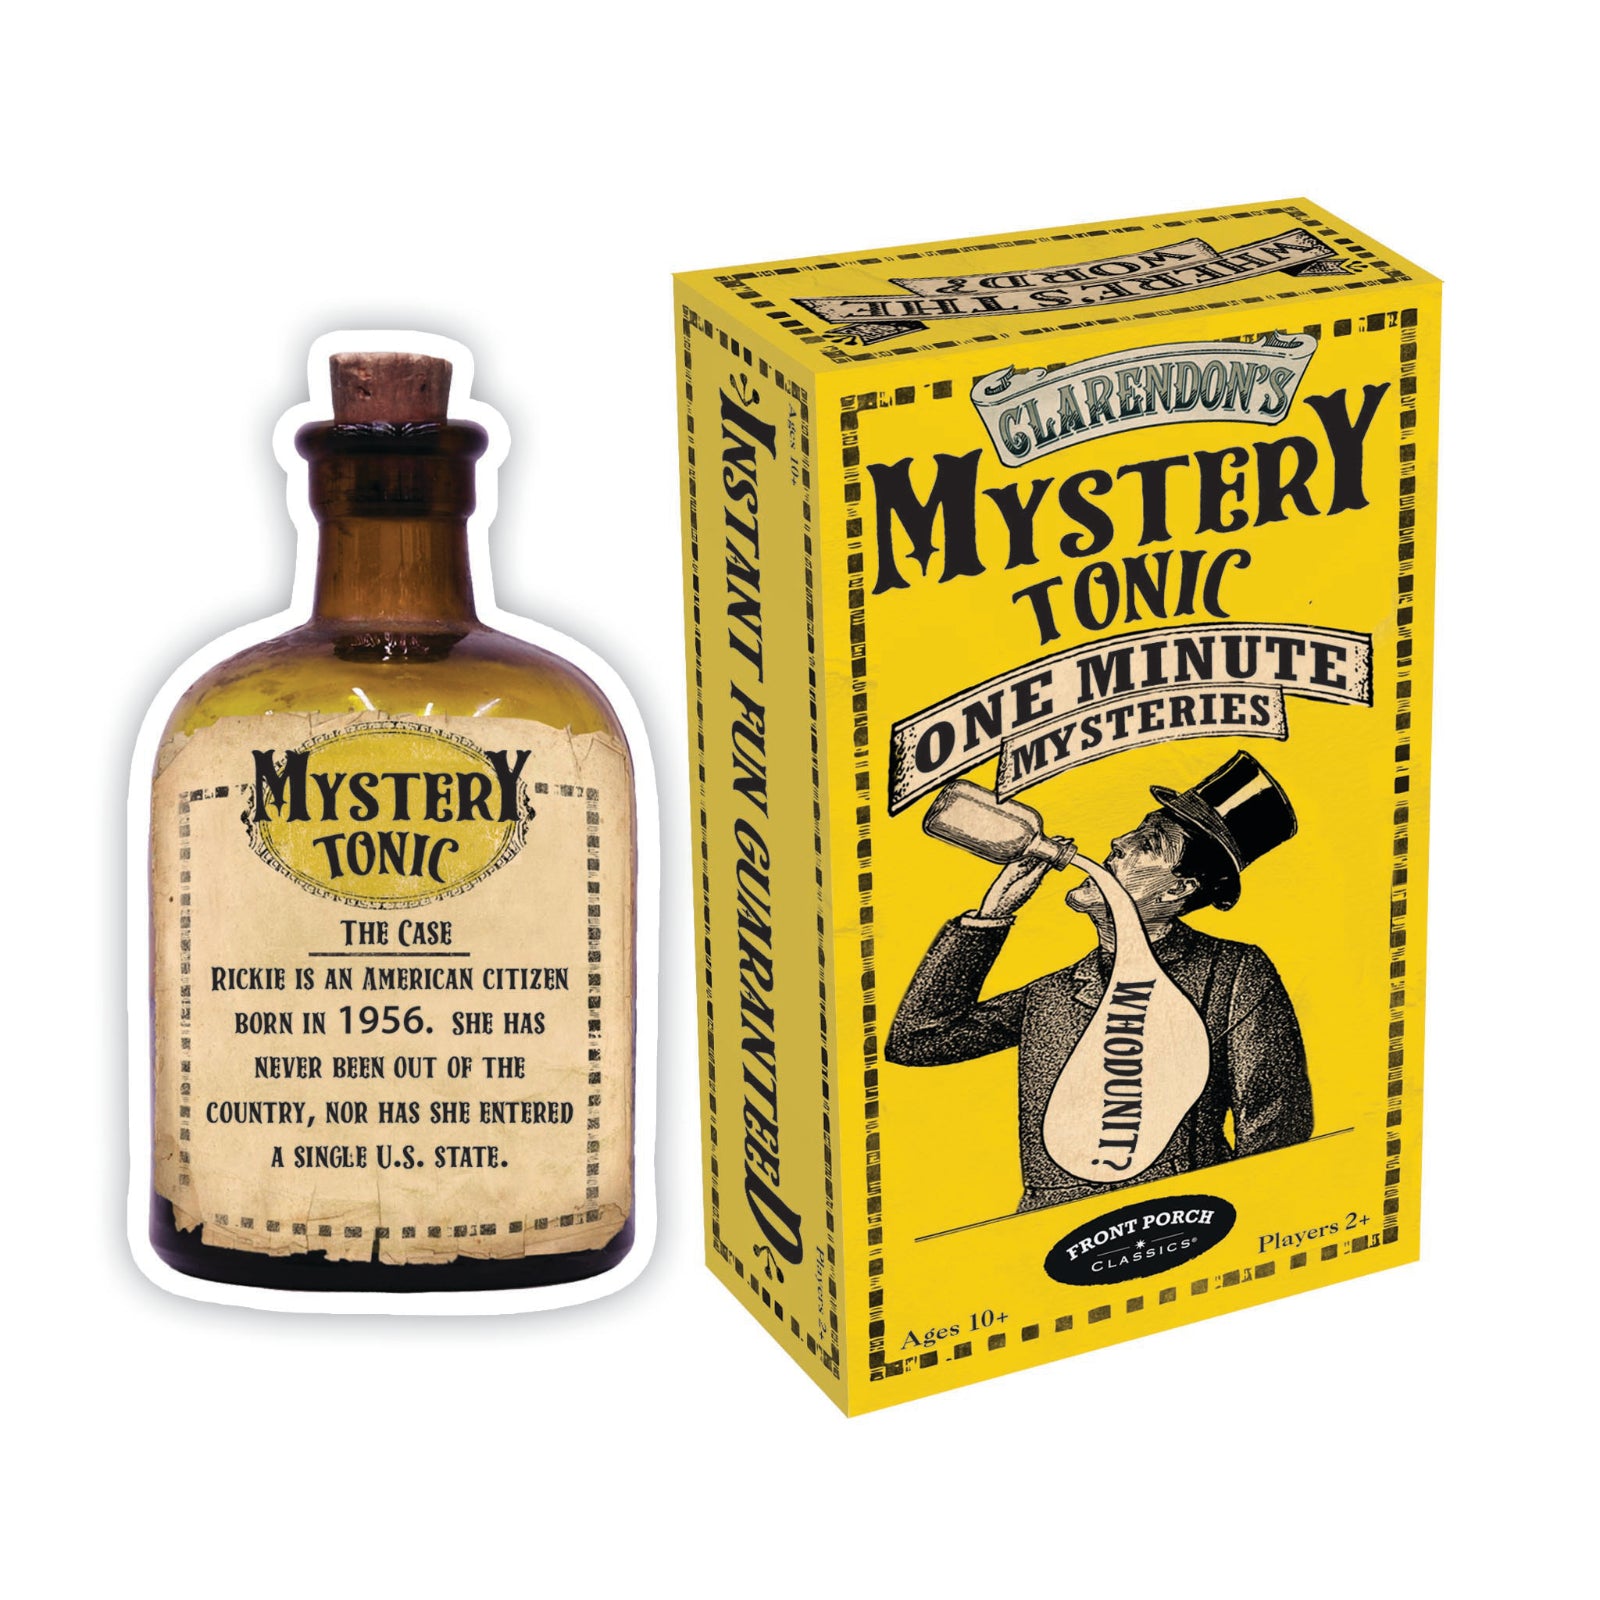 Claredon's Mystery Tonic - One Minute Mysteries